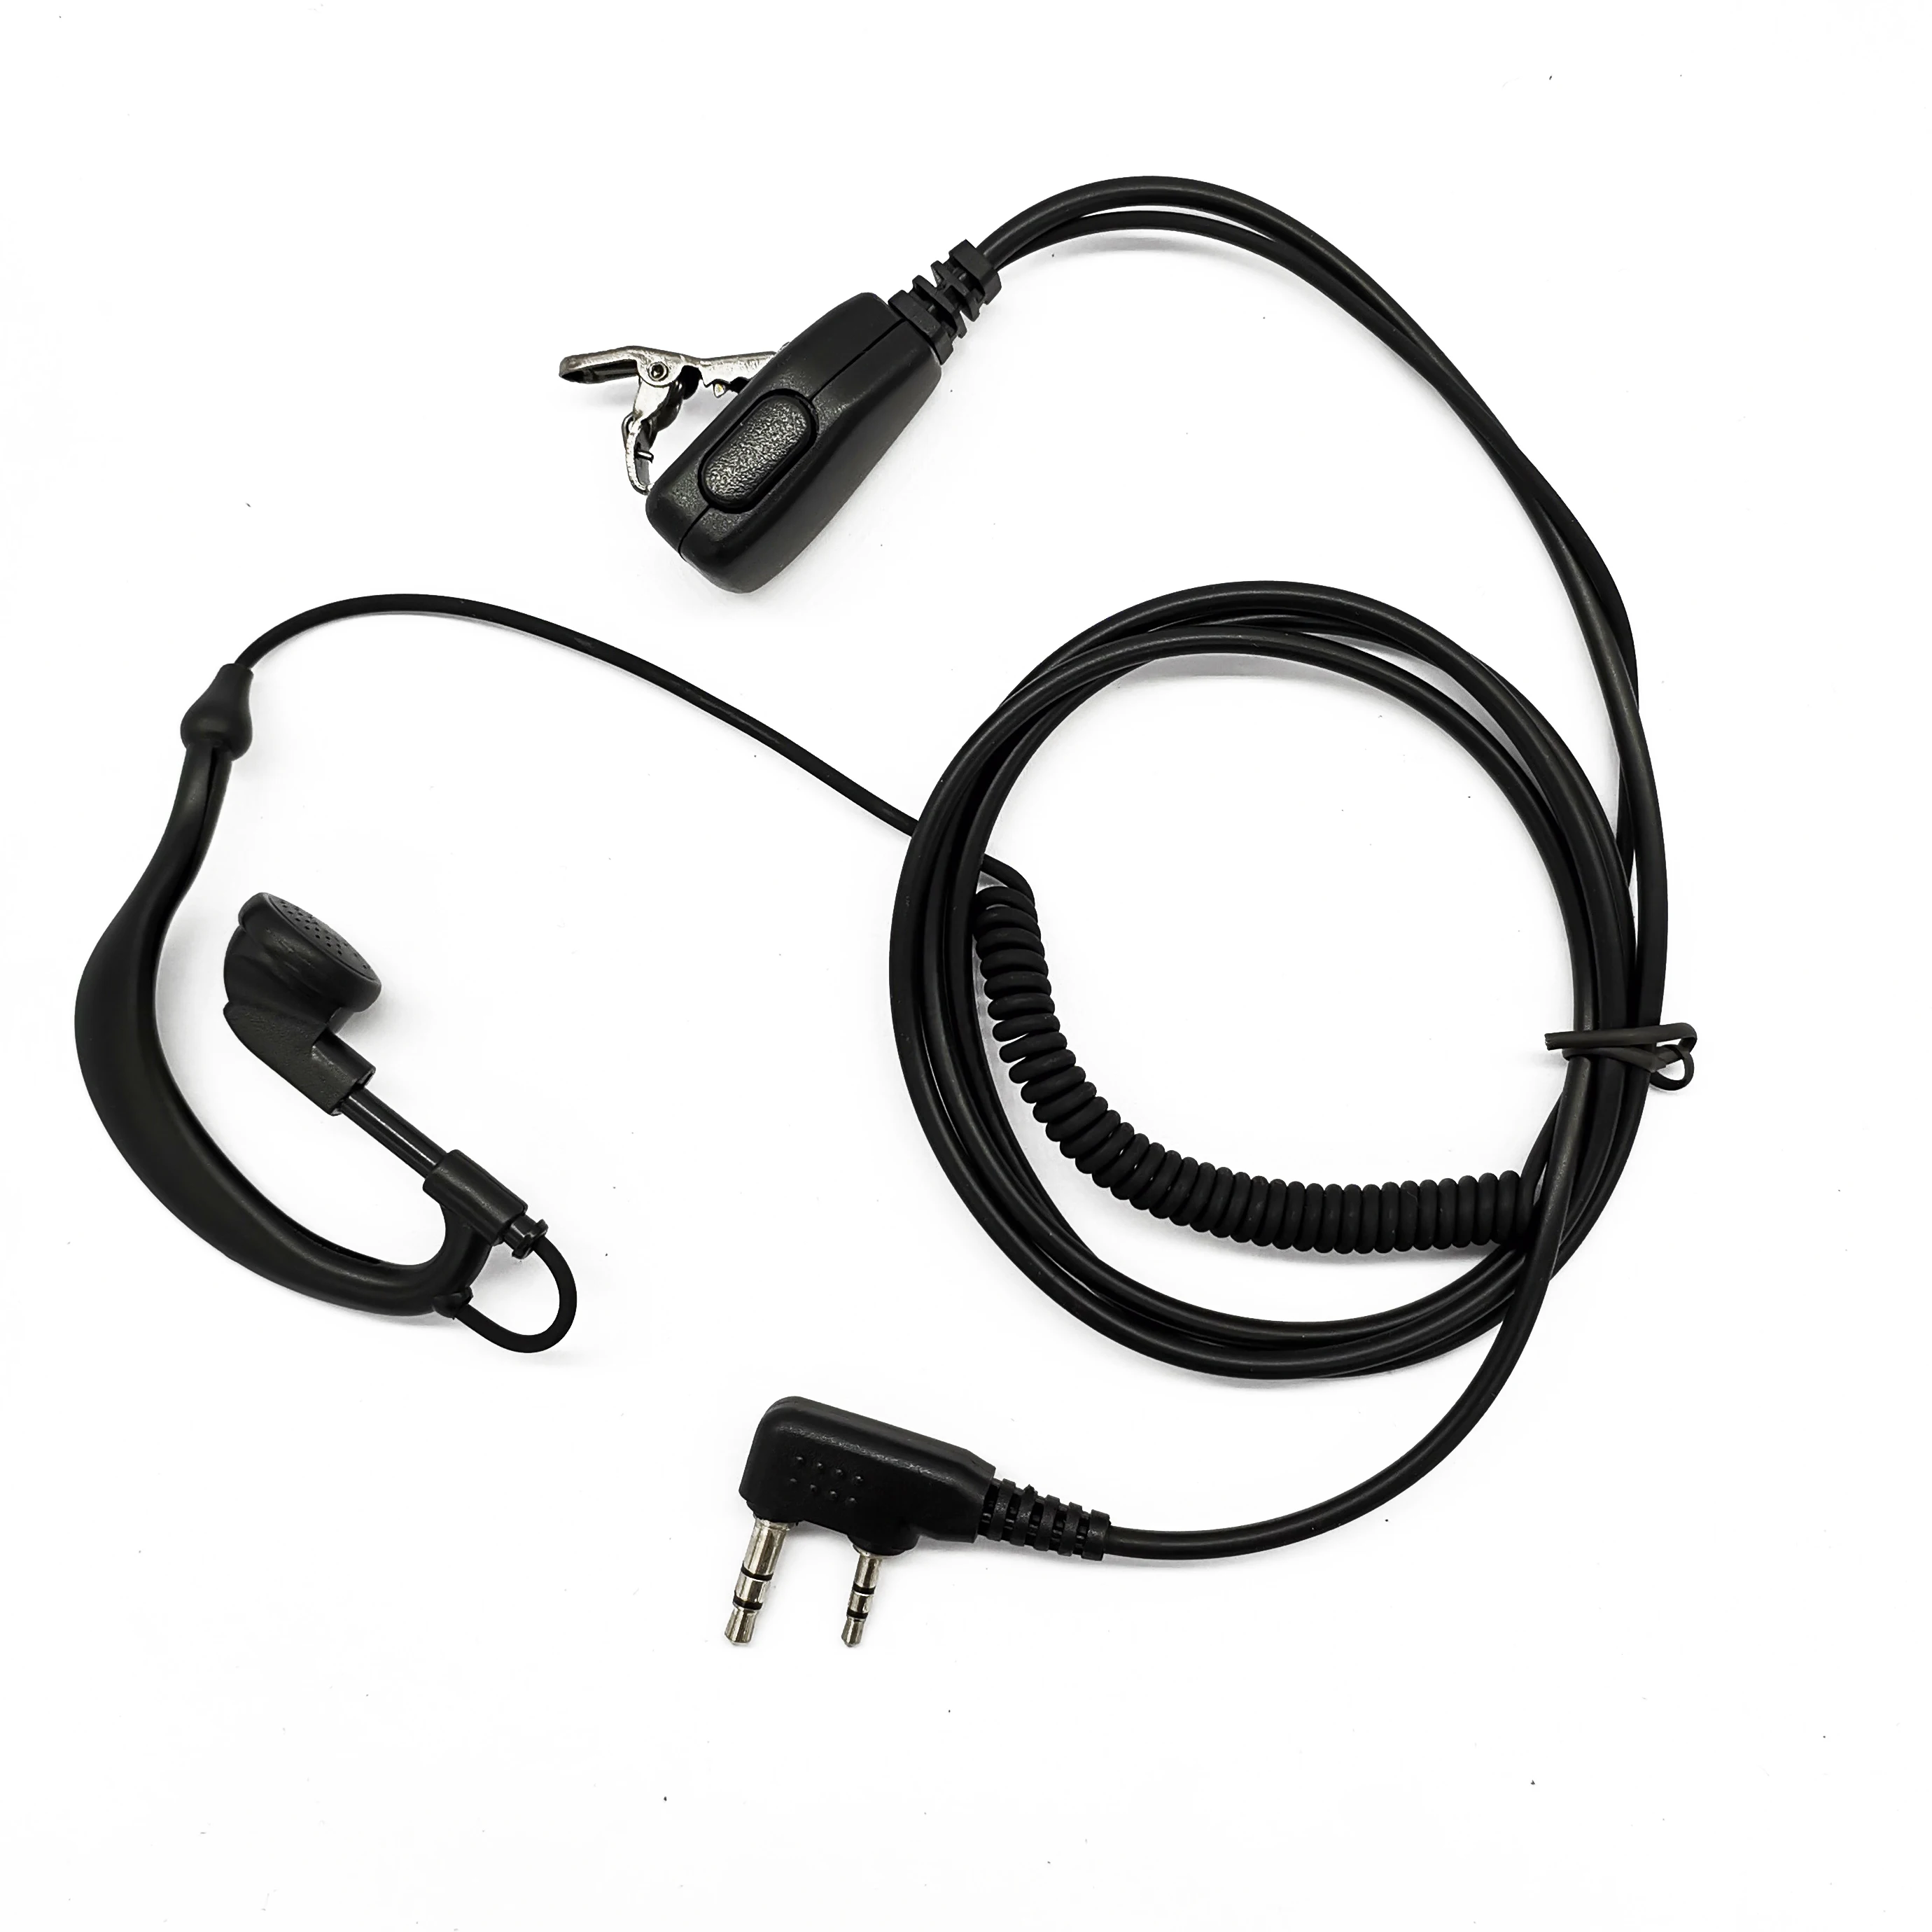 

2 Pin K plug G D Shape Coil Cable Two Way Radio Walkie Talkie Earpiece Headset for kenwood